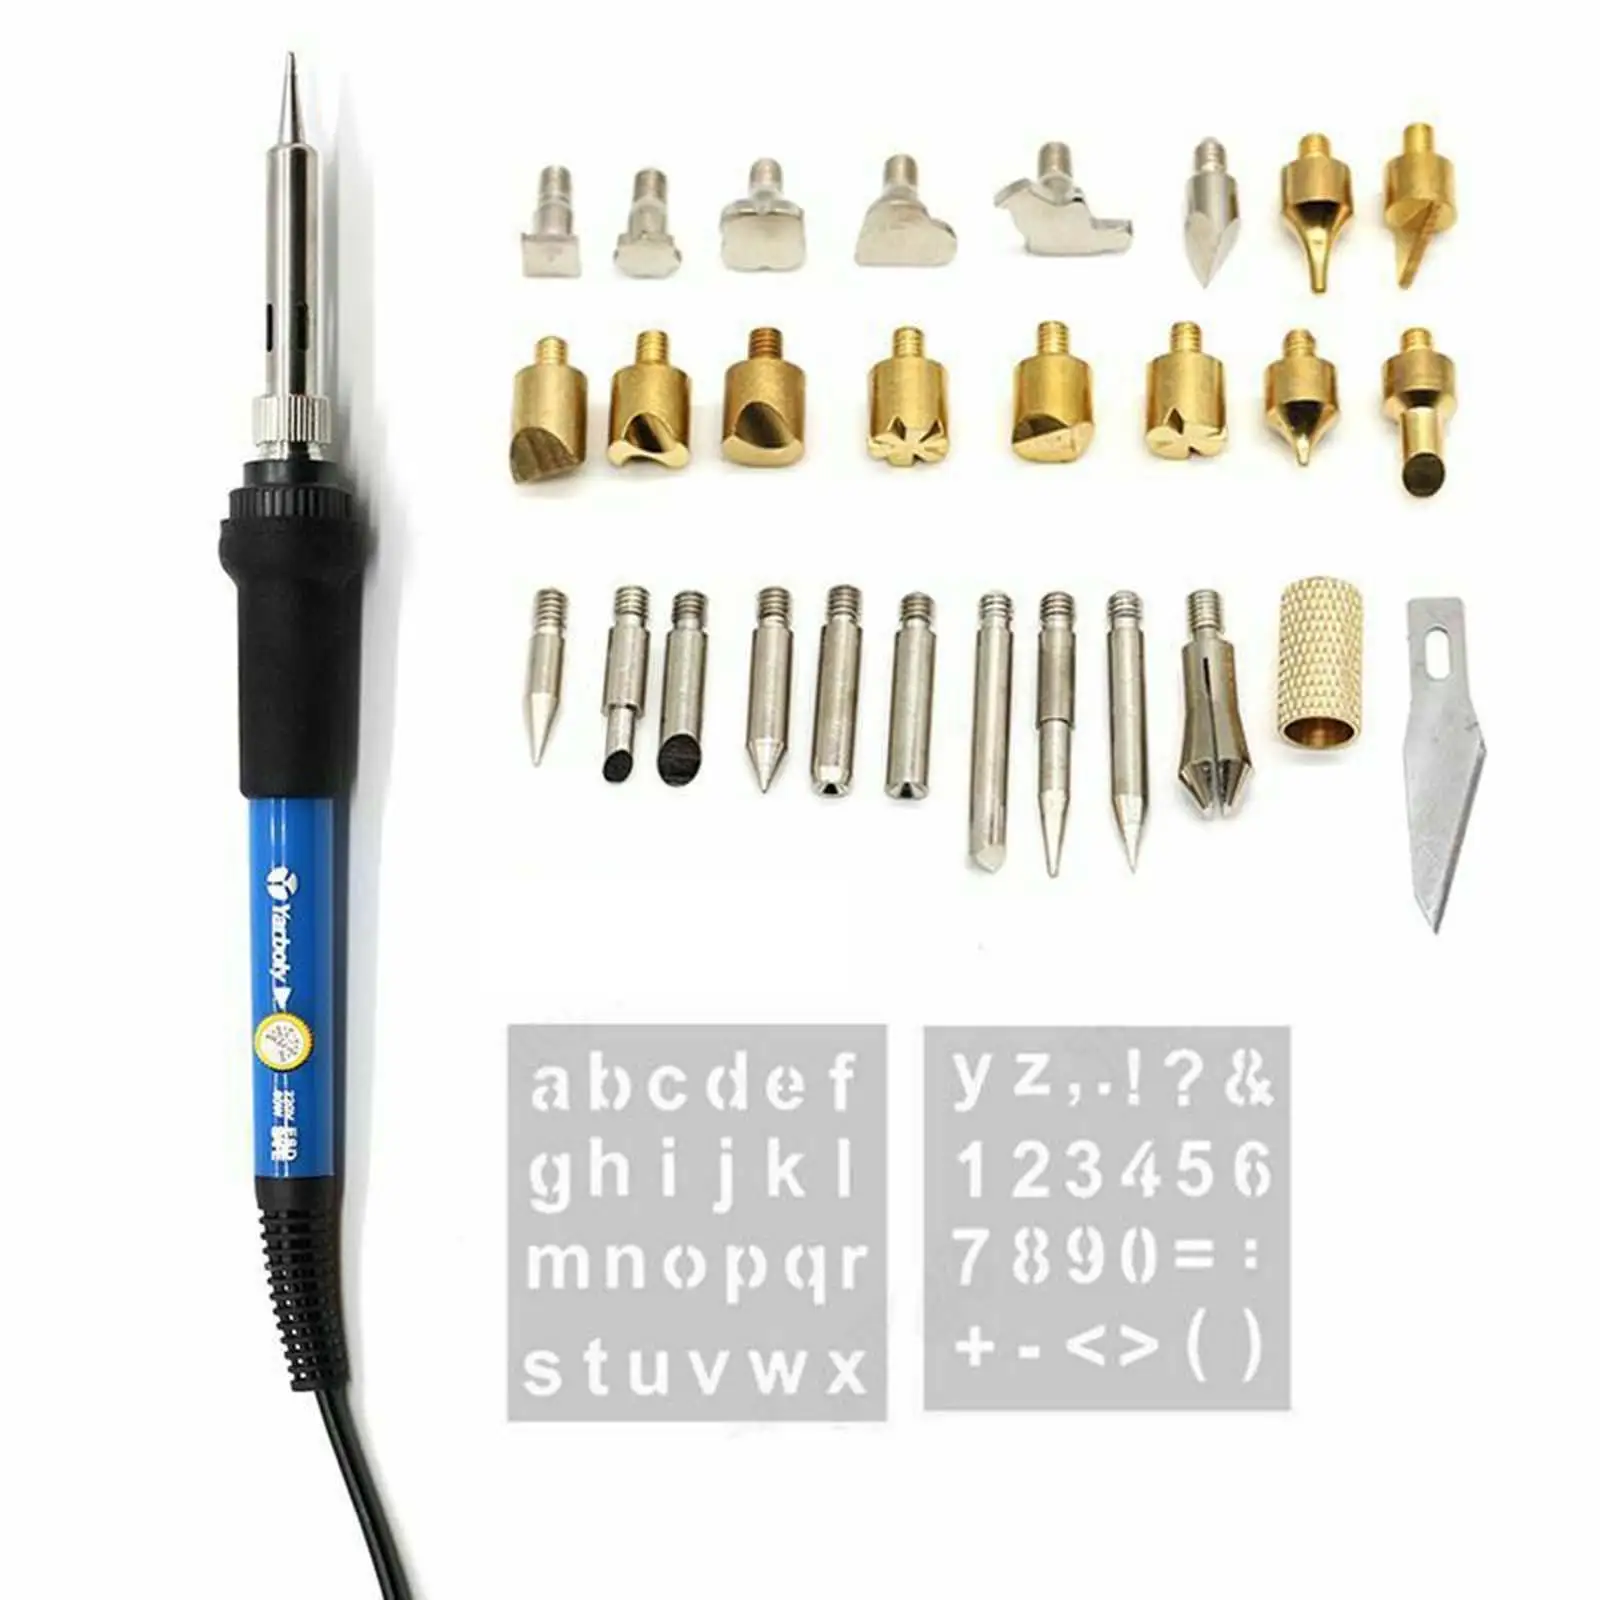 30 Pieces Solder Iron Tool Portable Electronic Product Welding Digital Display Professional Welding Repair Tool Soldering Iron